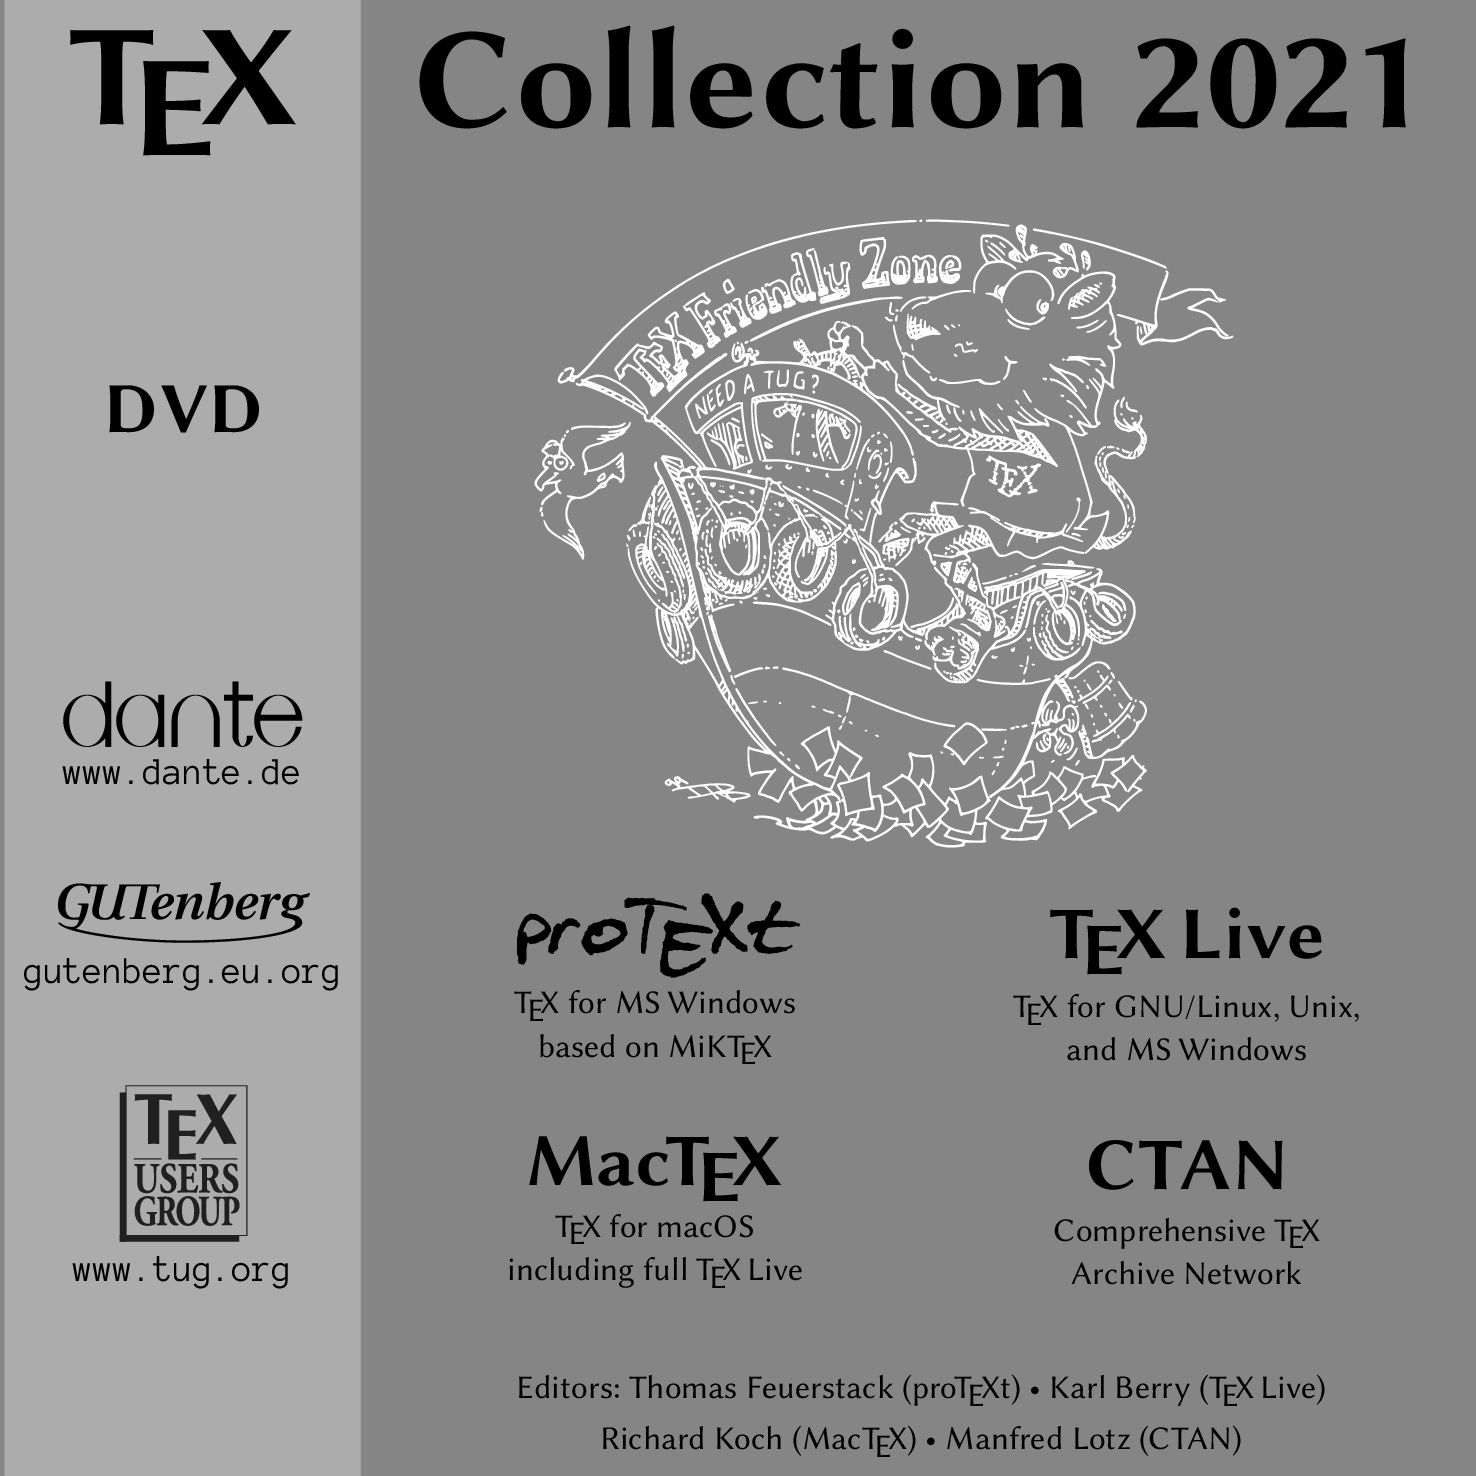 TeX Collection 2021